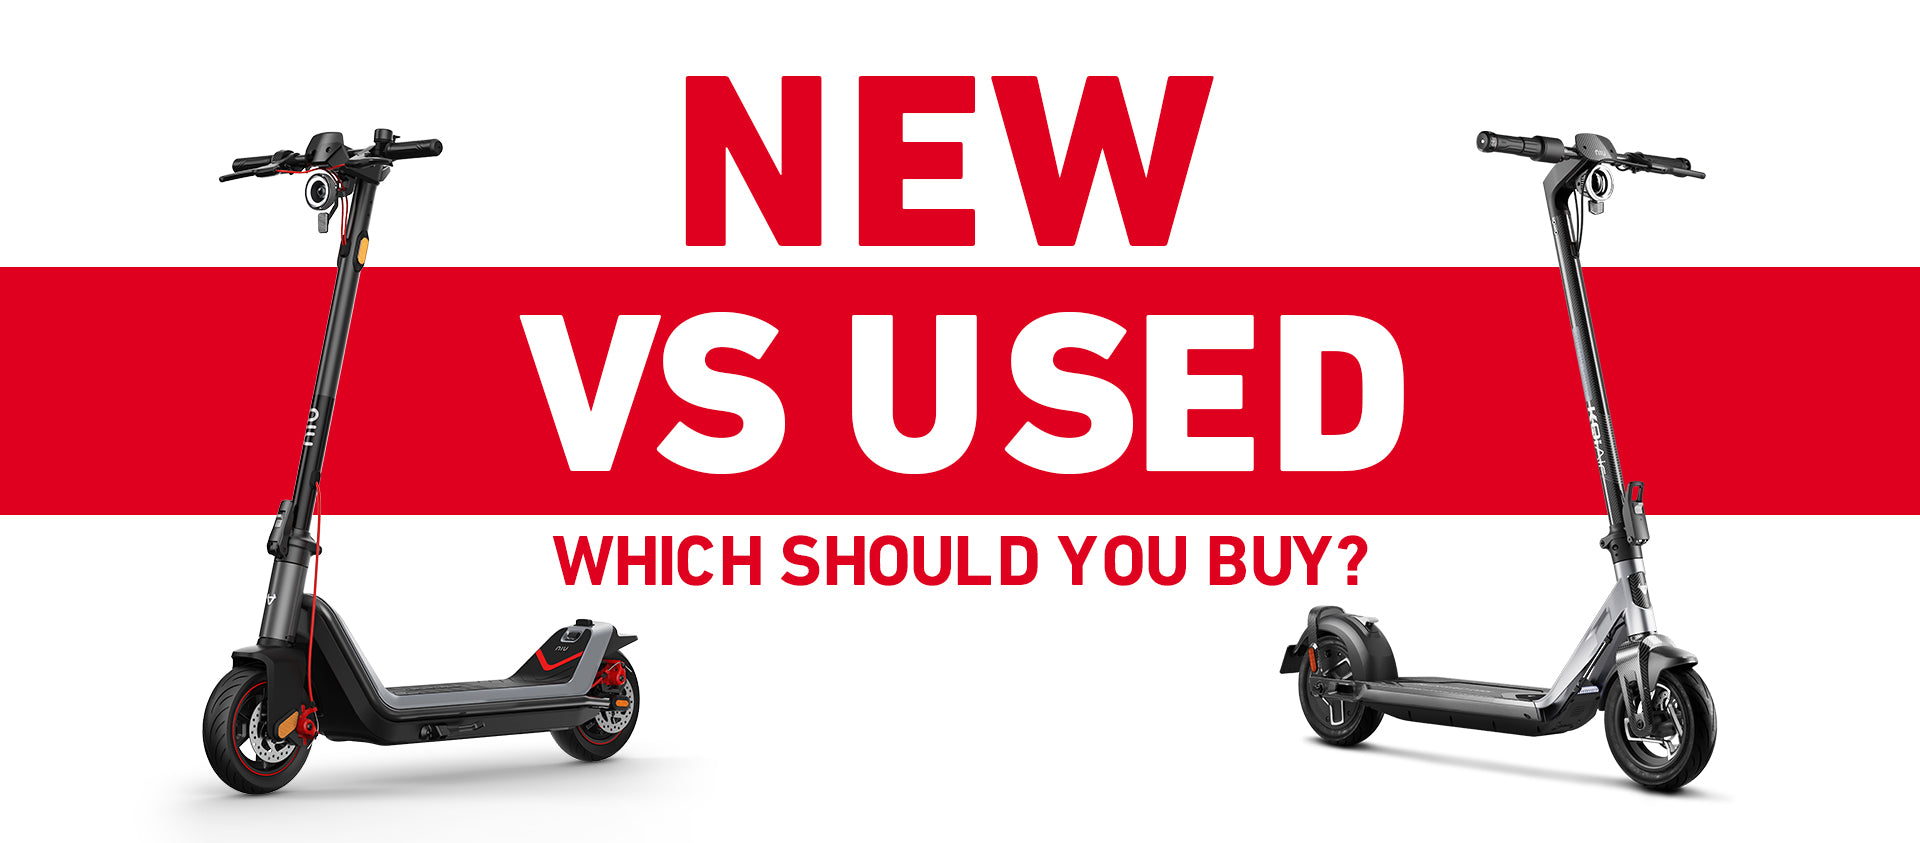 Is it OK to buy used electric scooter? – NIU® Official